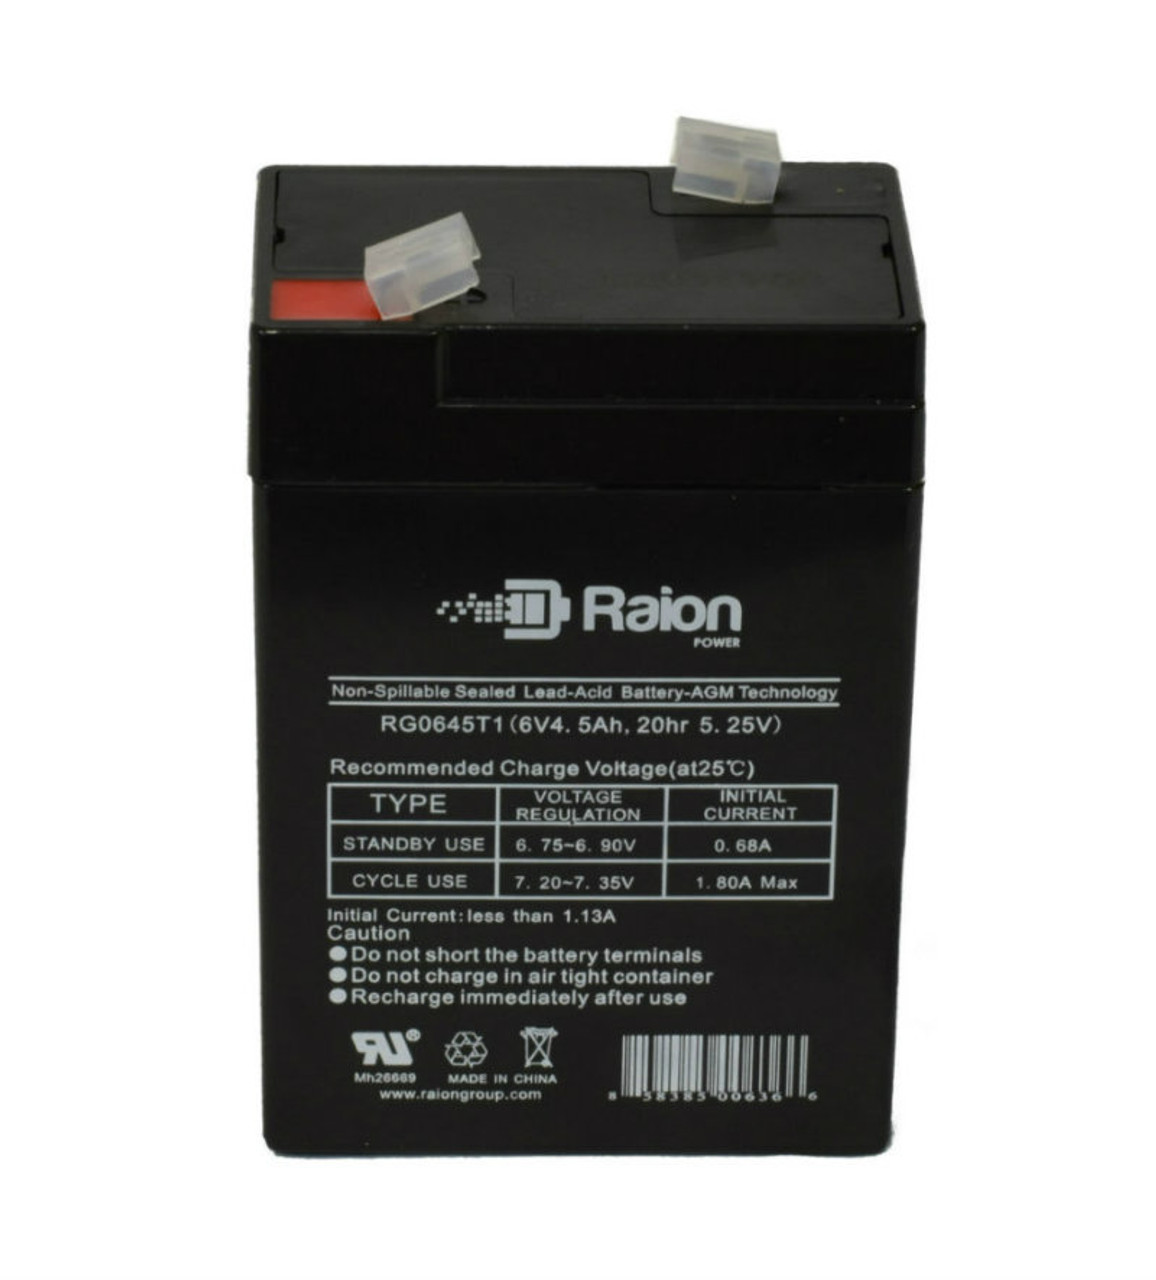 Raion Power RG0645T1 Replacement Battery Cartridge for Mule 6GC0121